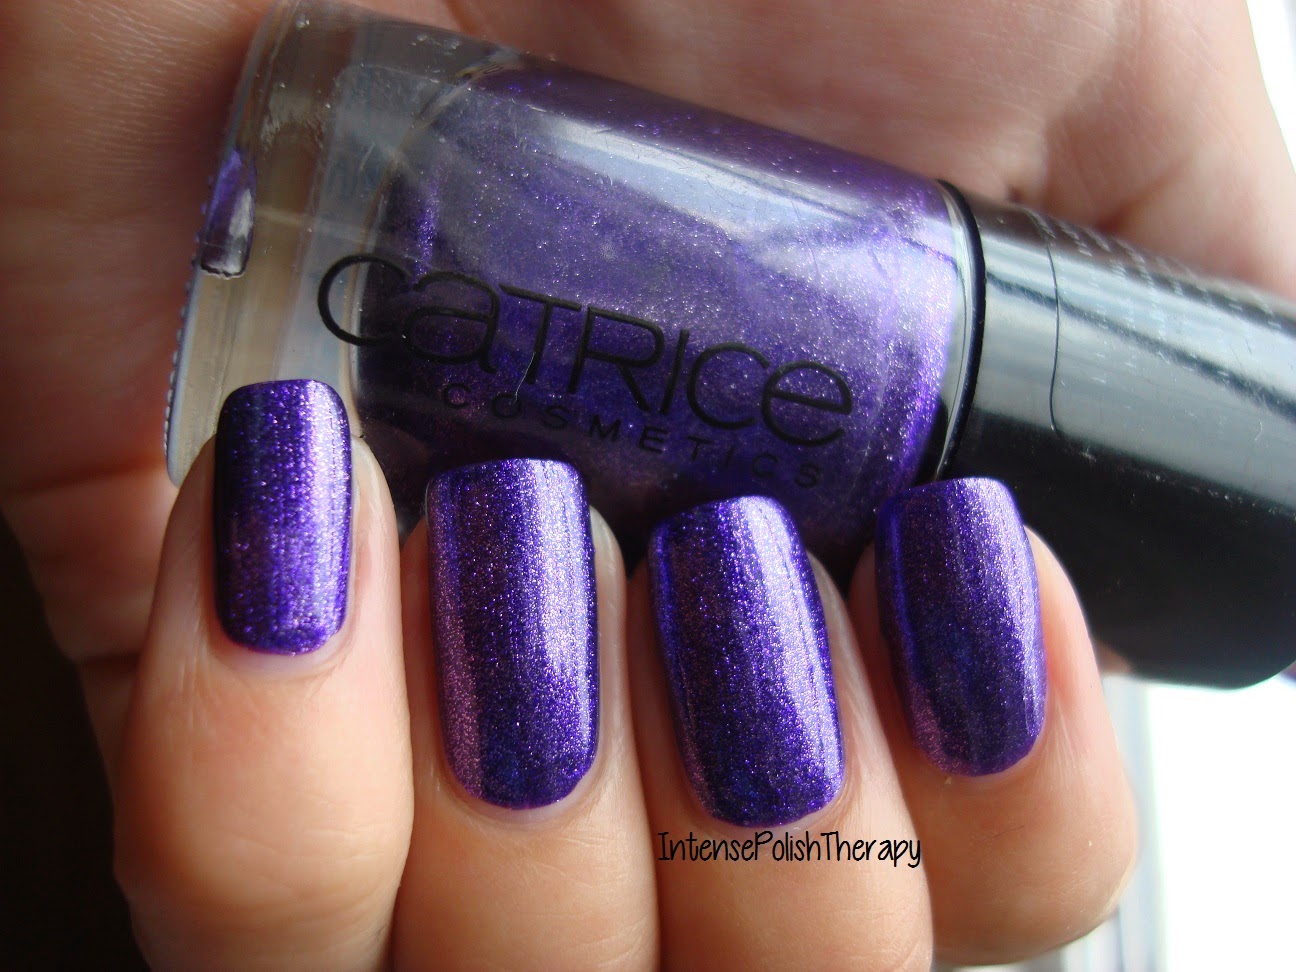 Catrice - Forget-Me-Not!